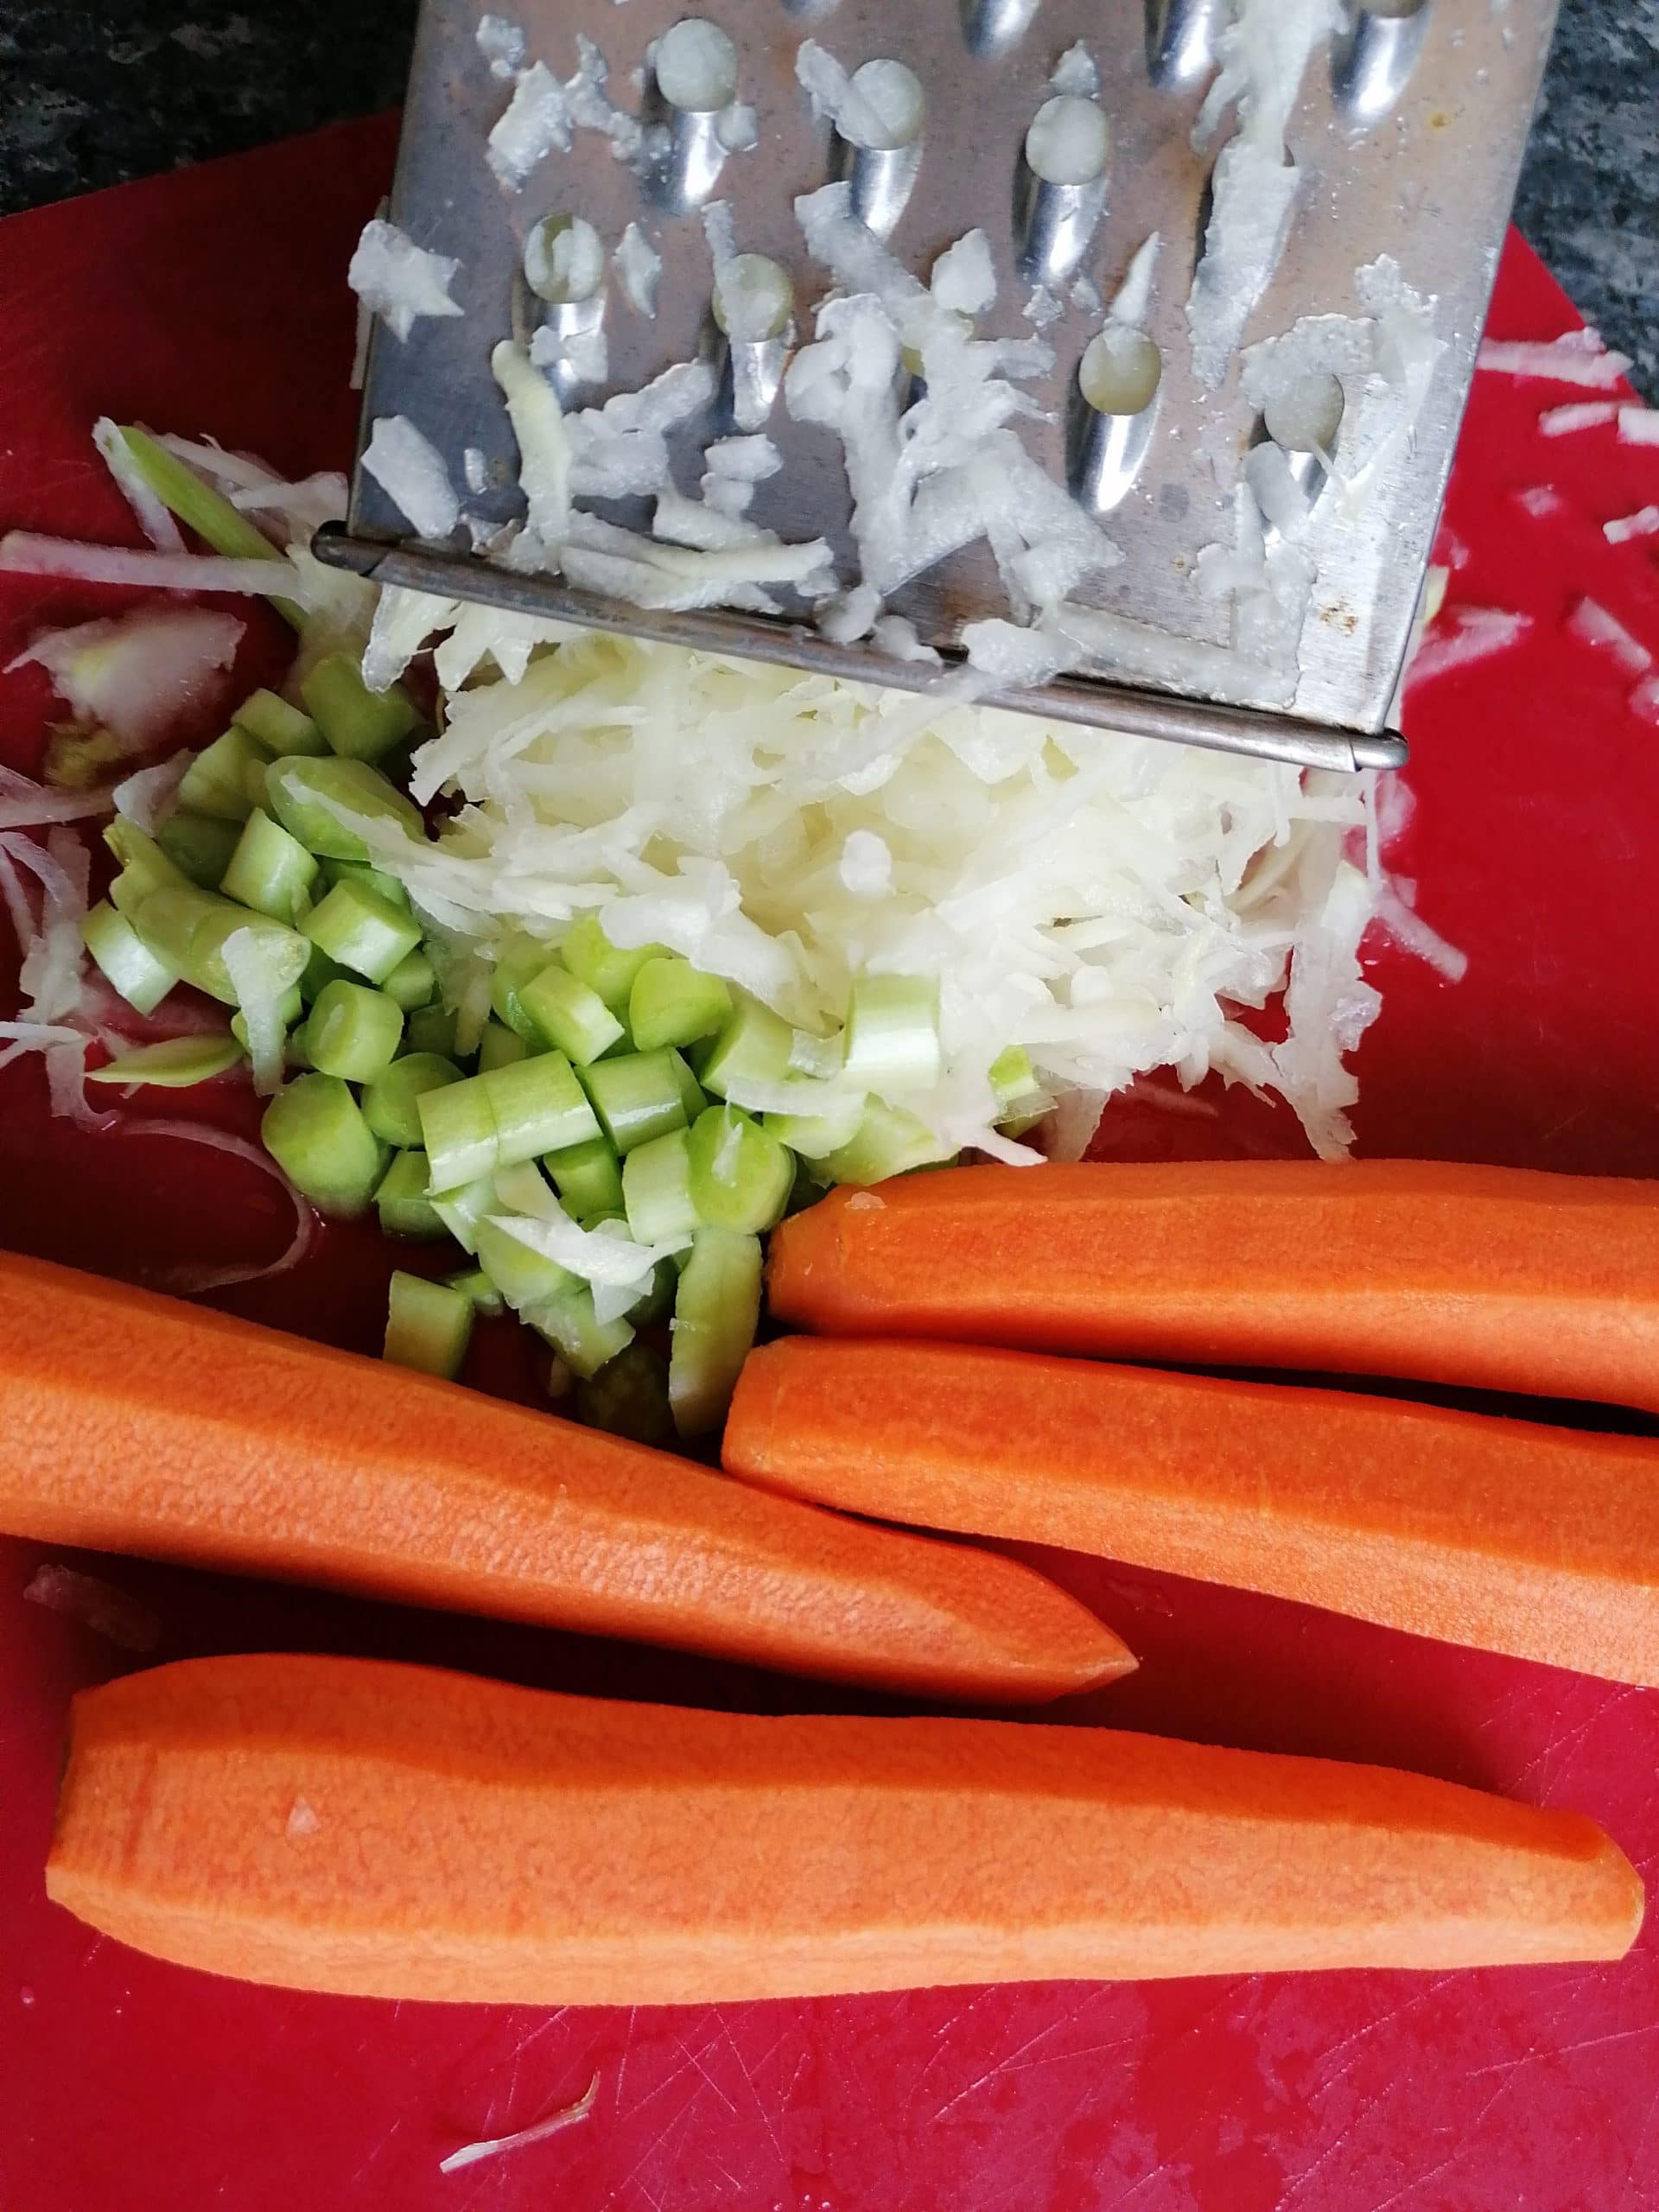 An image capturing the preparation process of Kohlrabi Quiche, showcasing a peeled kohlrabi being grated on a box grater. The grater's sharp blades transform the kohlrabi into fine shreds, ready to be incorporated into the quiche filling.